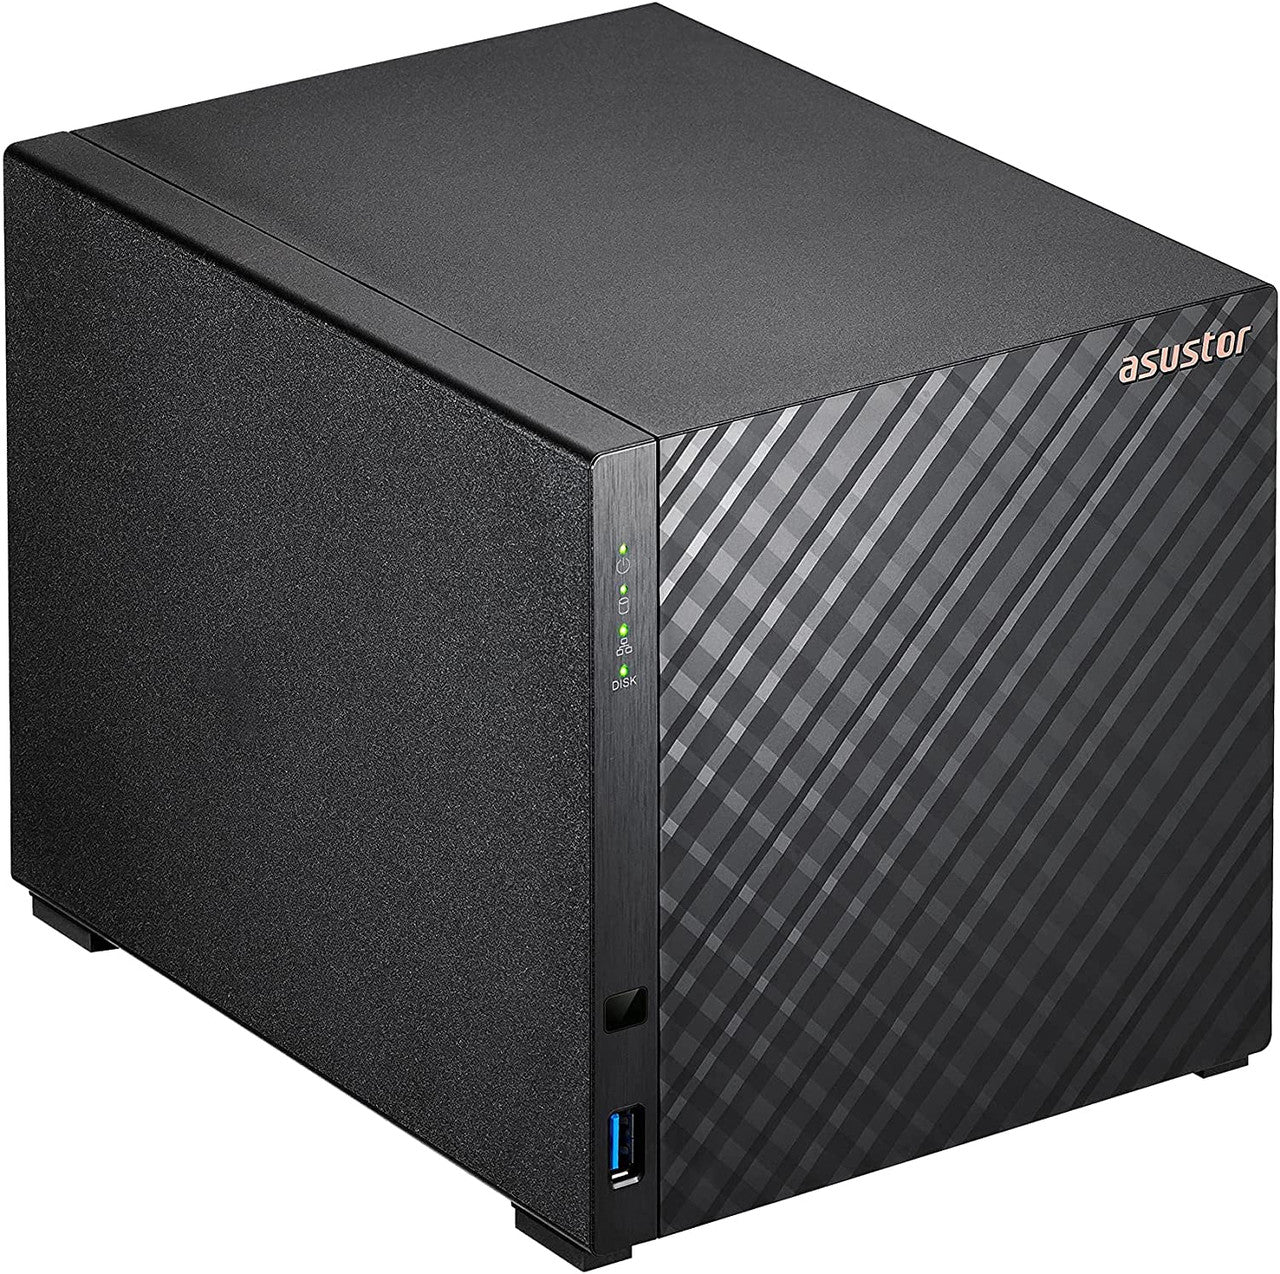 Asustor AS1104T 4-Bay Drivestor 4 NAS with 1GB RAM and 88TB (4x22TB) Seagate Ironwolf PRO Drives